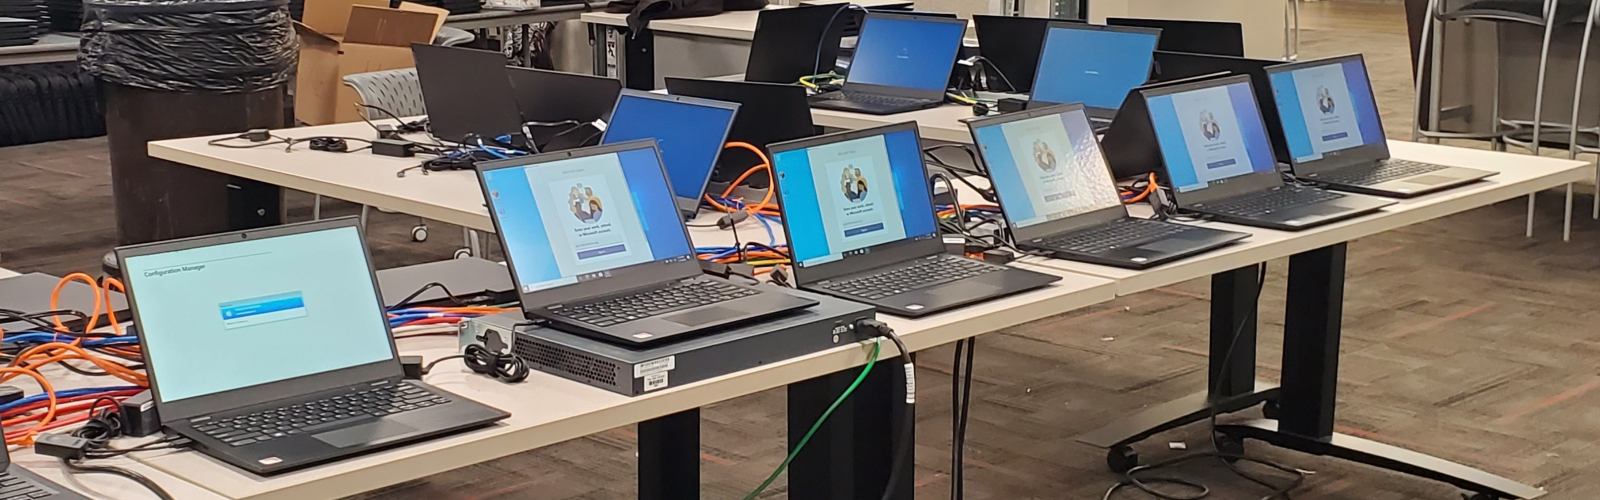 student laptops in a computer lab